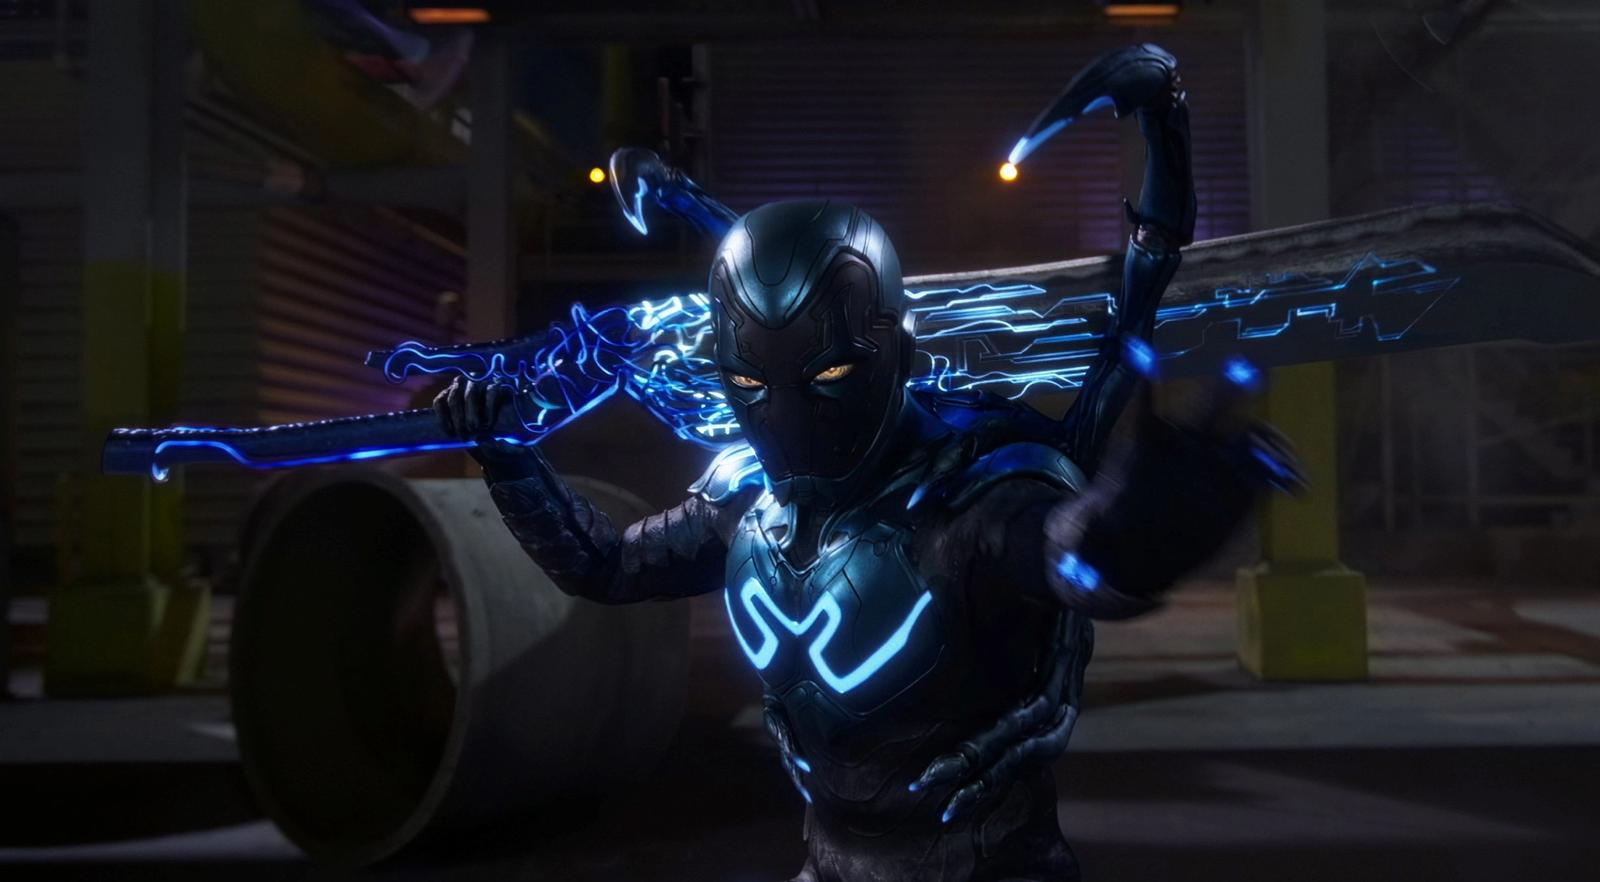 Blue Beetle crafts Jaime Reyes a new weapon